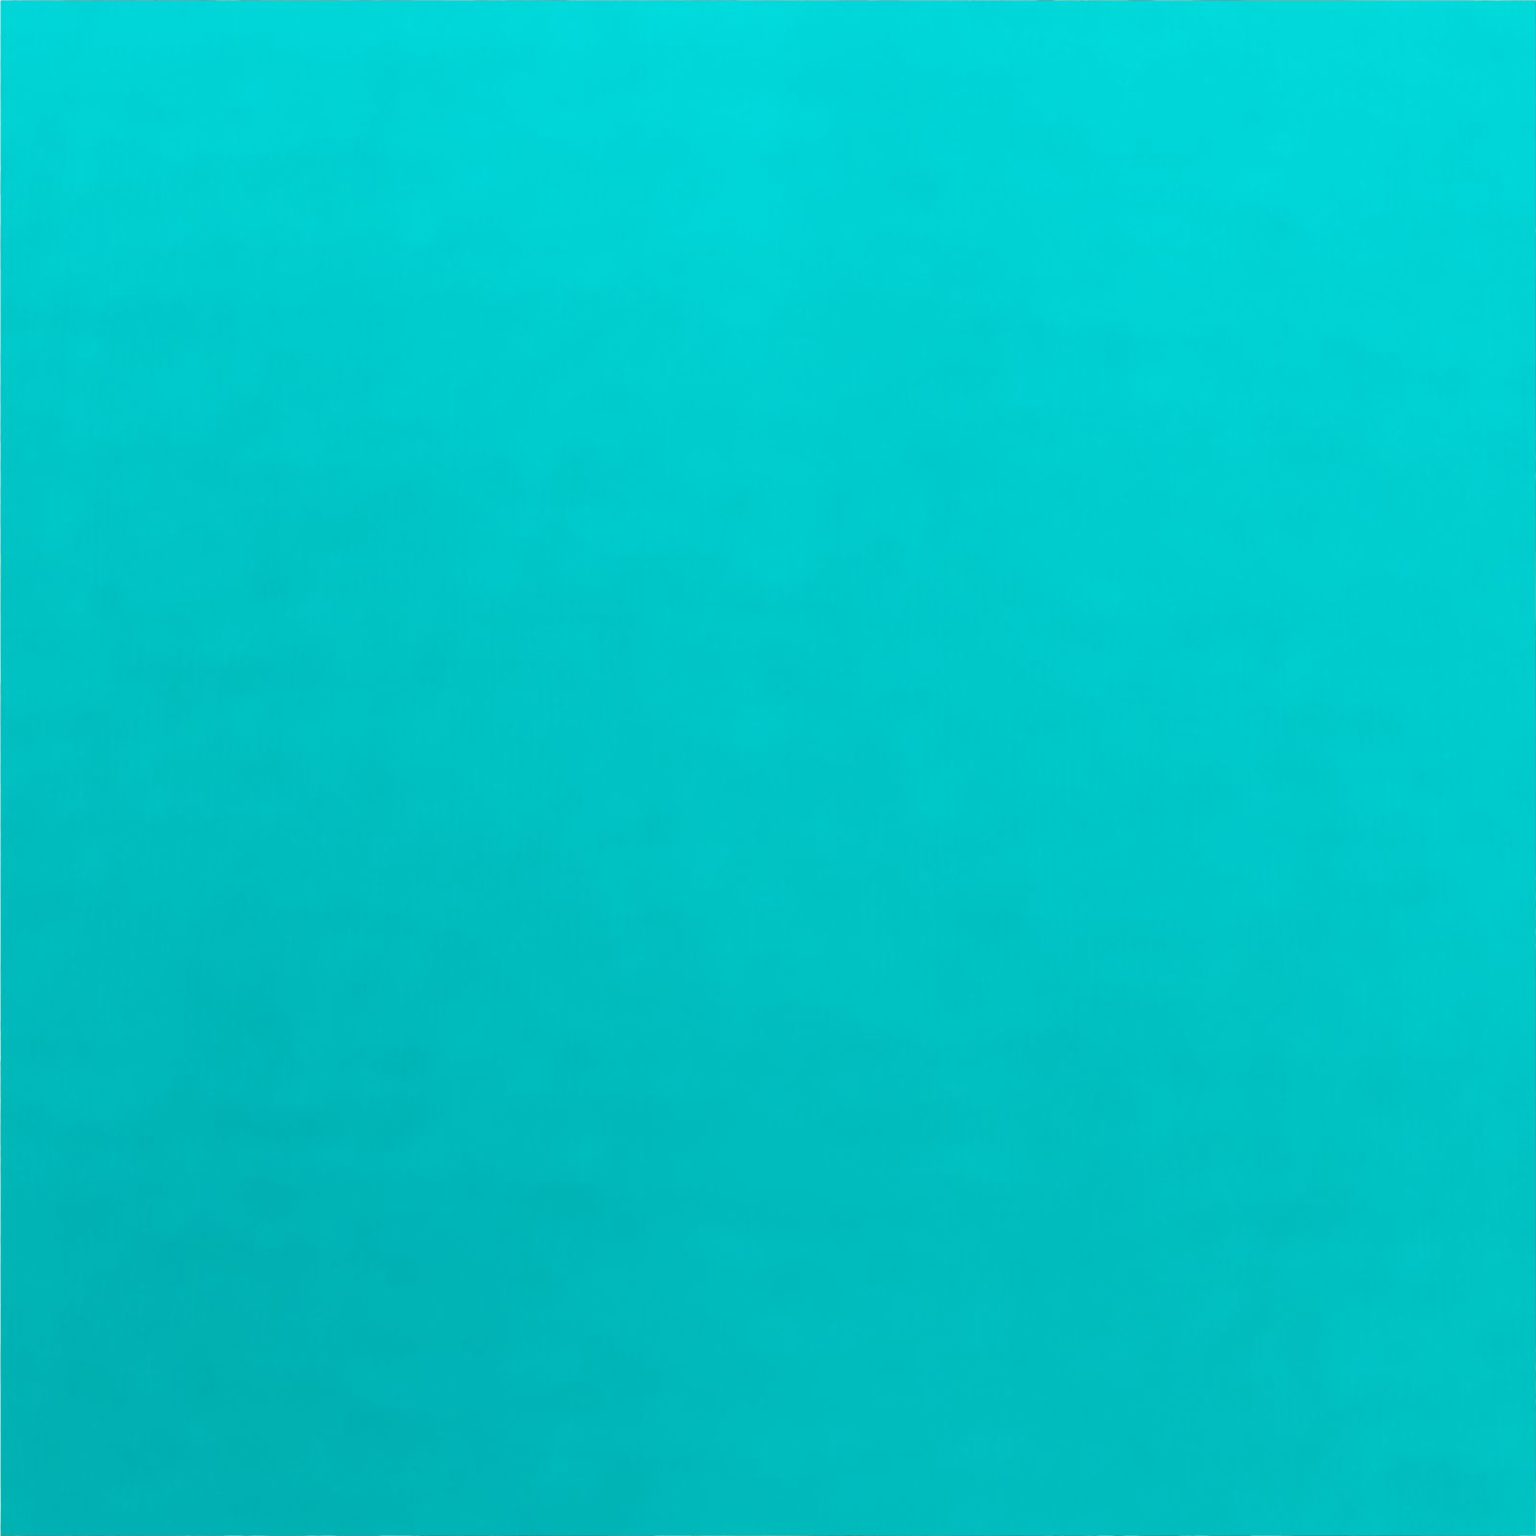 Dressmaking Fabric | Teal Plain Cotton Fabric | More Sewing